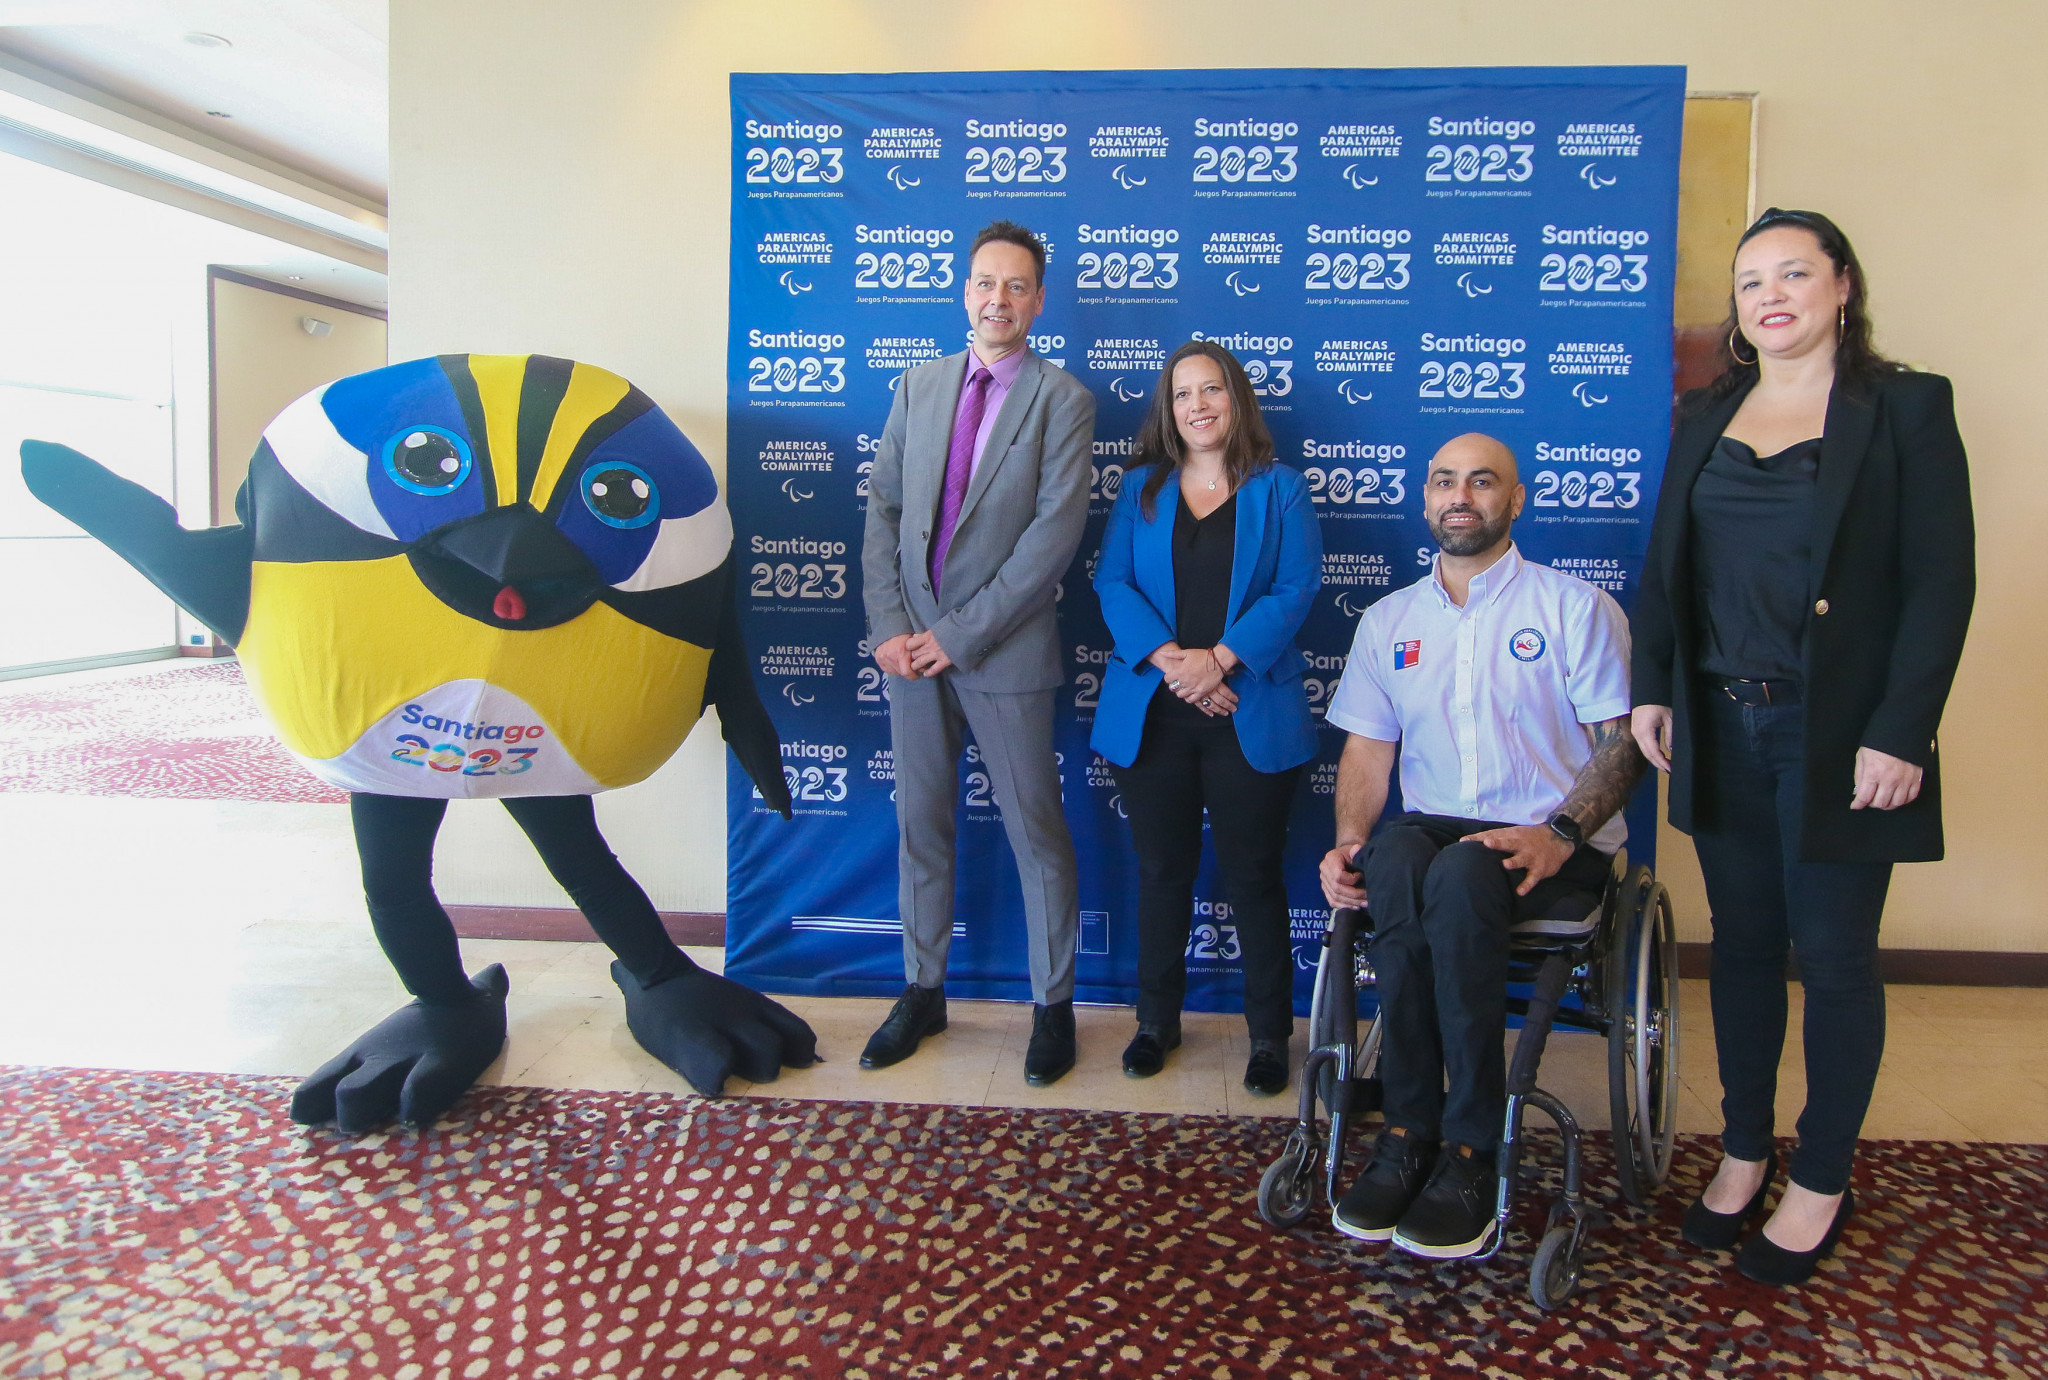 IPC visits Santiago 2023 to mark one-year-to-go until start of Parapan American Games